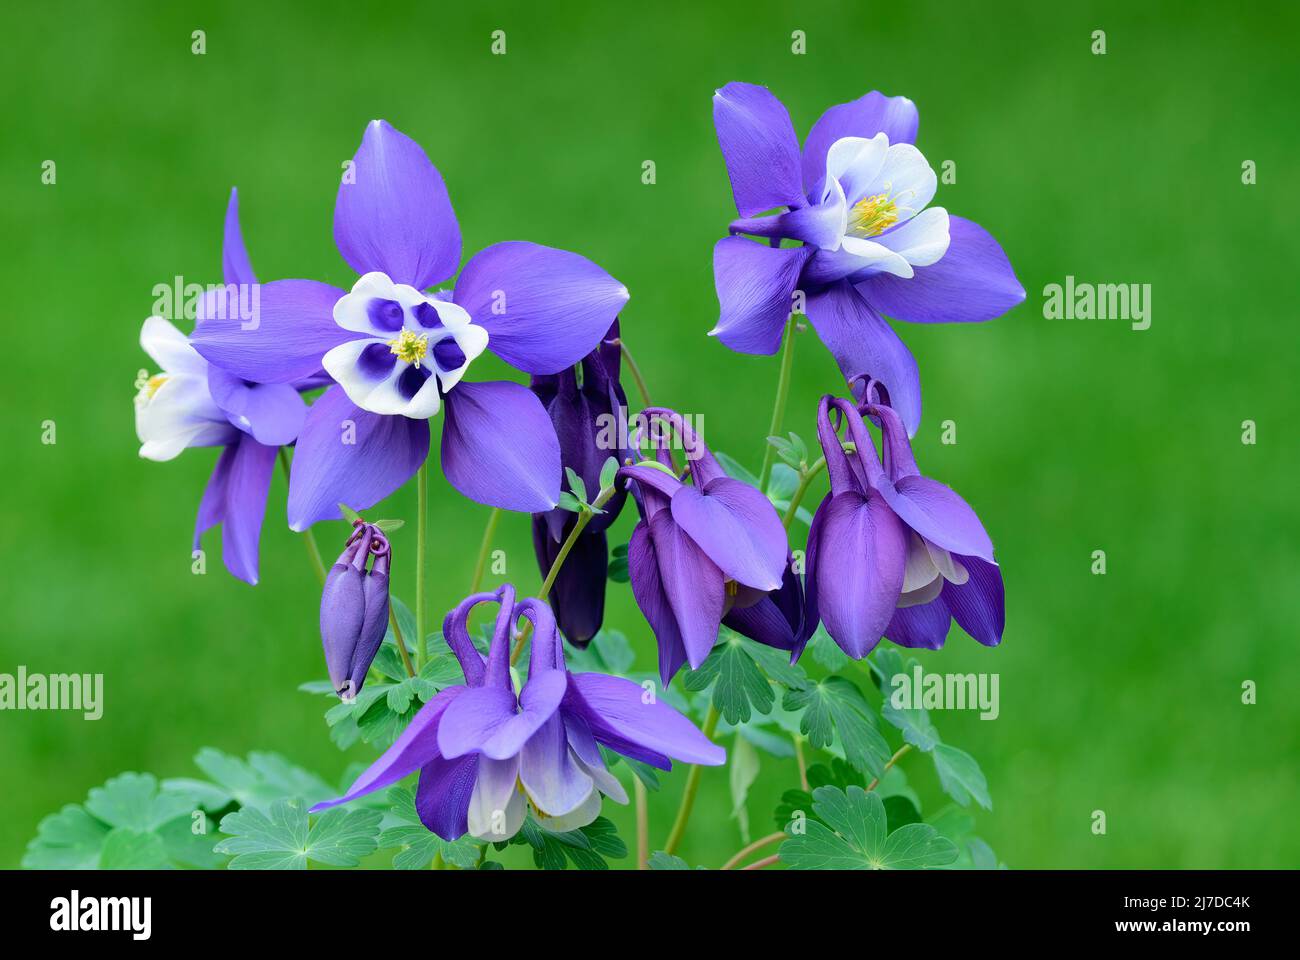 Aquilegia caerulea, columbine plant, closeup. Blue white flowers with buds and leaves. Blurred natural green background, copy space. Trencin, Slovakia Stock Photo